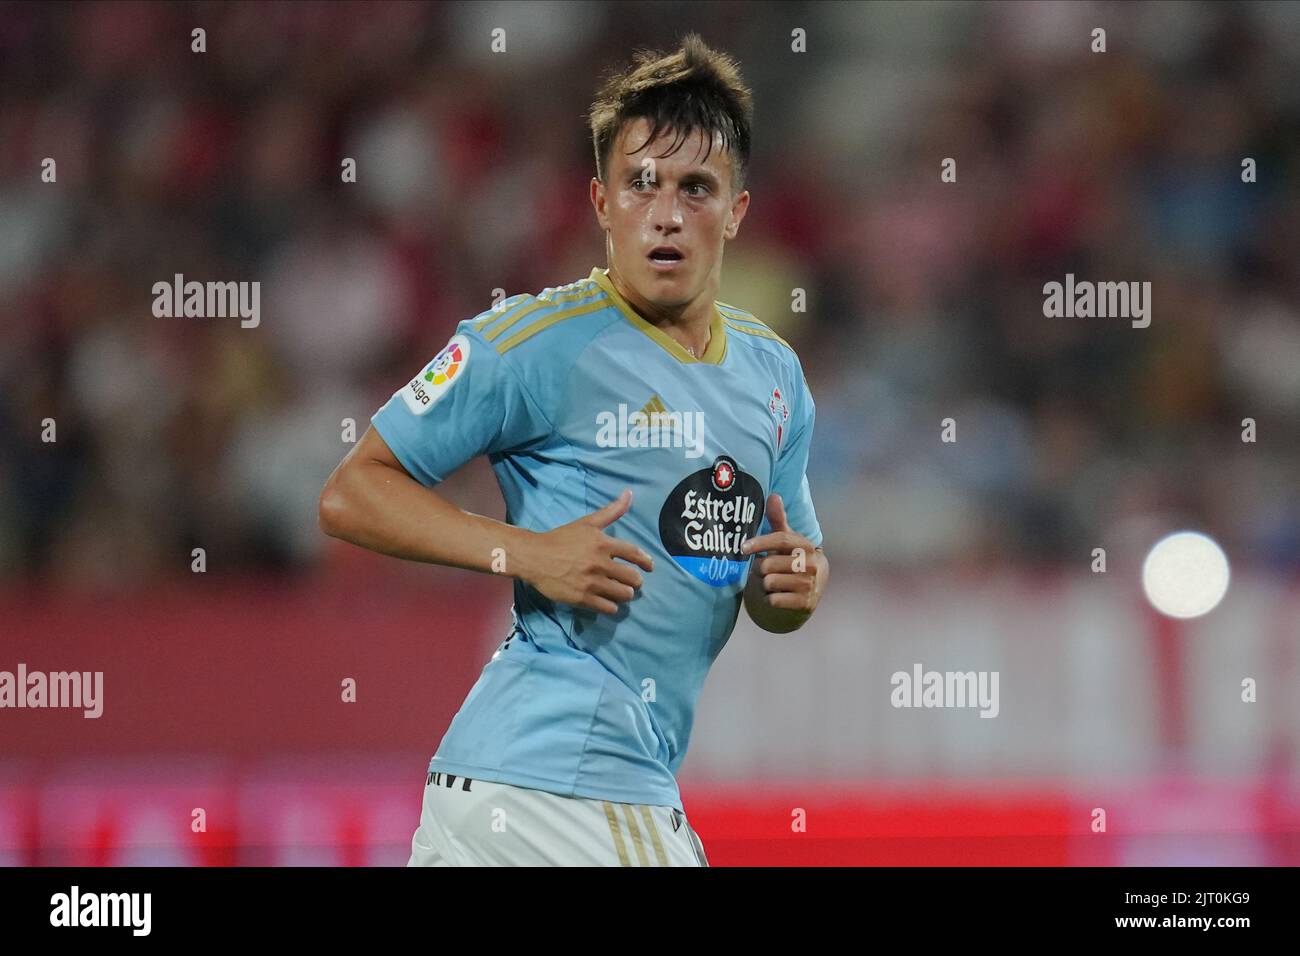 Franco Cervi of RC Celta during the La Liga match between Girona FC and RC Celta played at Montilivi Stadium on August 26, 2022 in Girona, Spain. (Photo by Sergio Ruiz / PRESSIN) Stock Photo